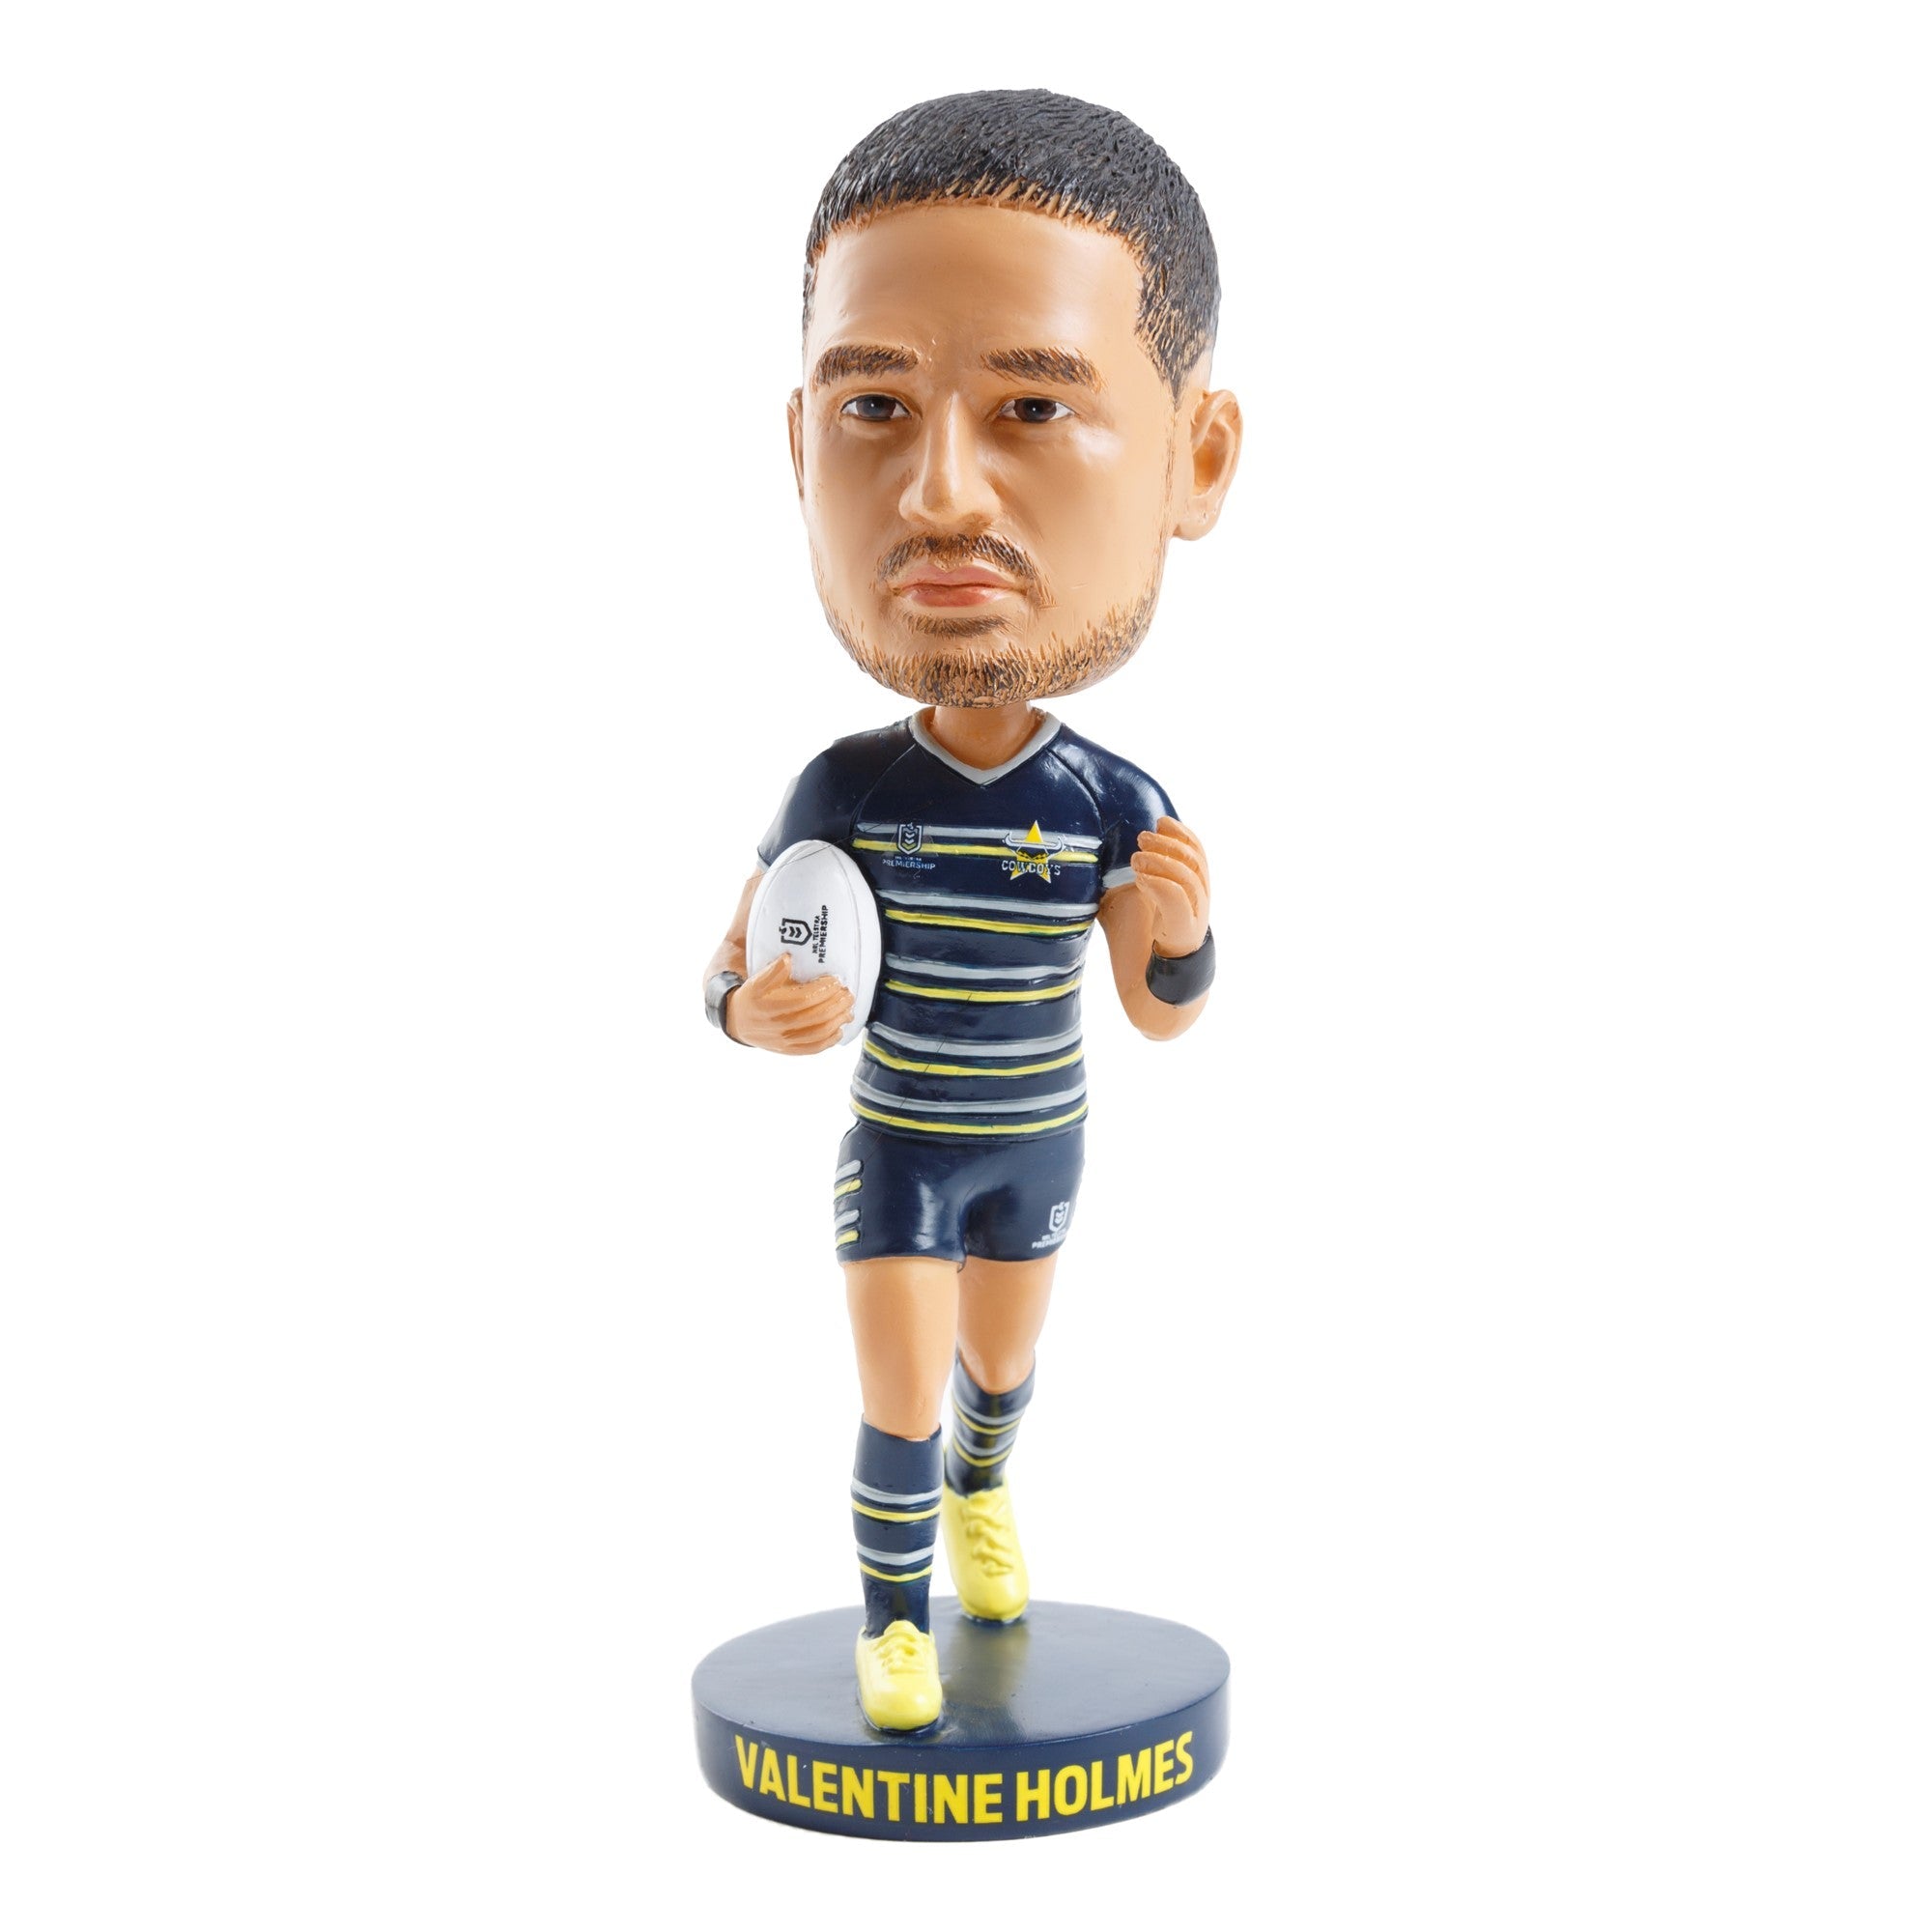 NRL North QLD Cowboys VALENTINE HOLMES Bobblehead Collectable 18cm tall statue